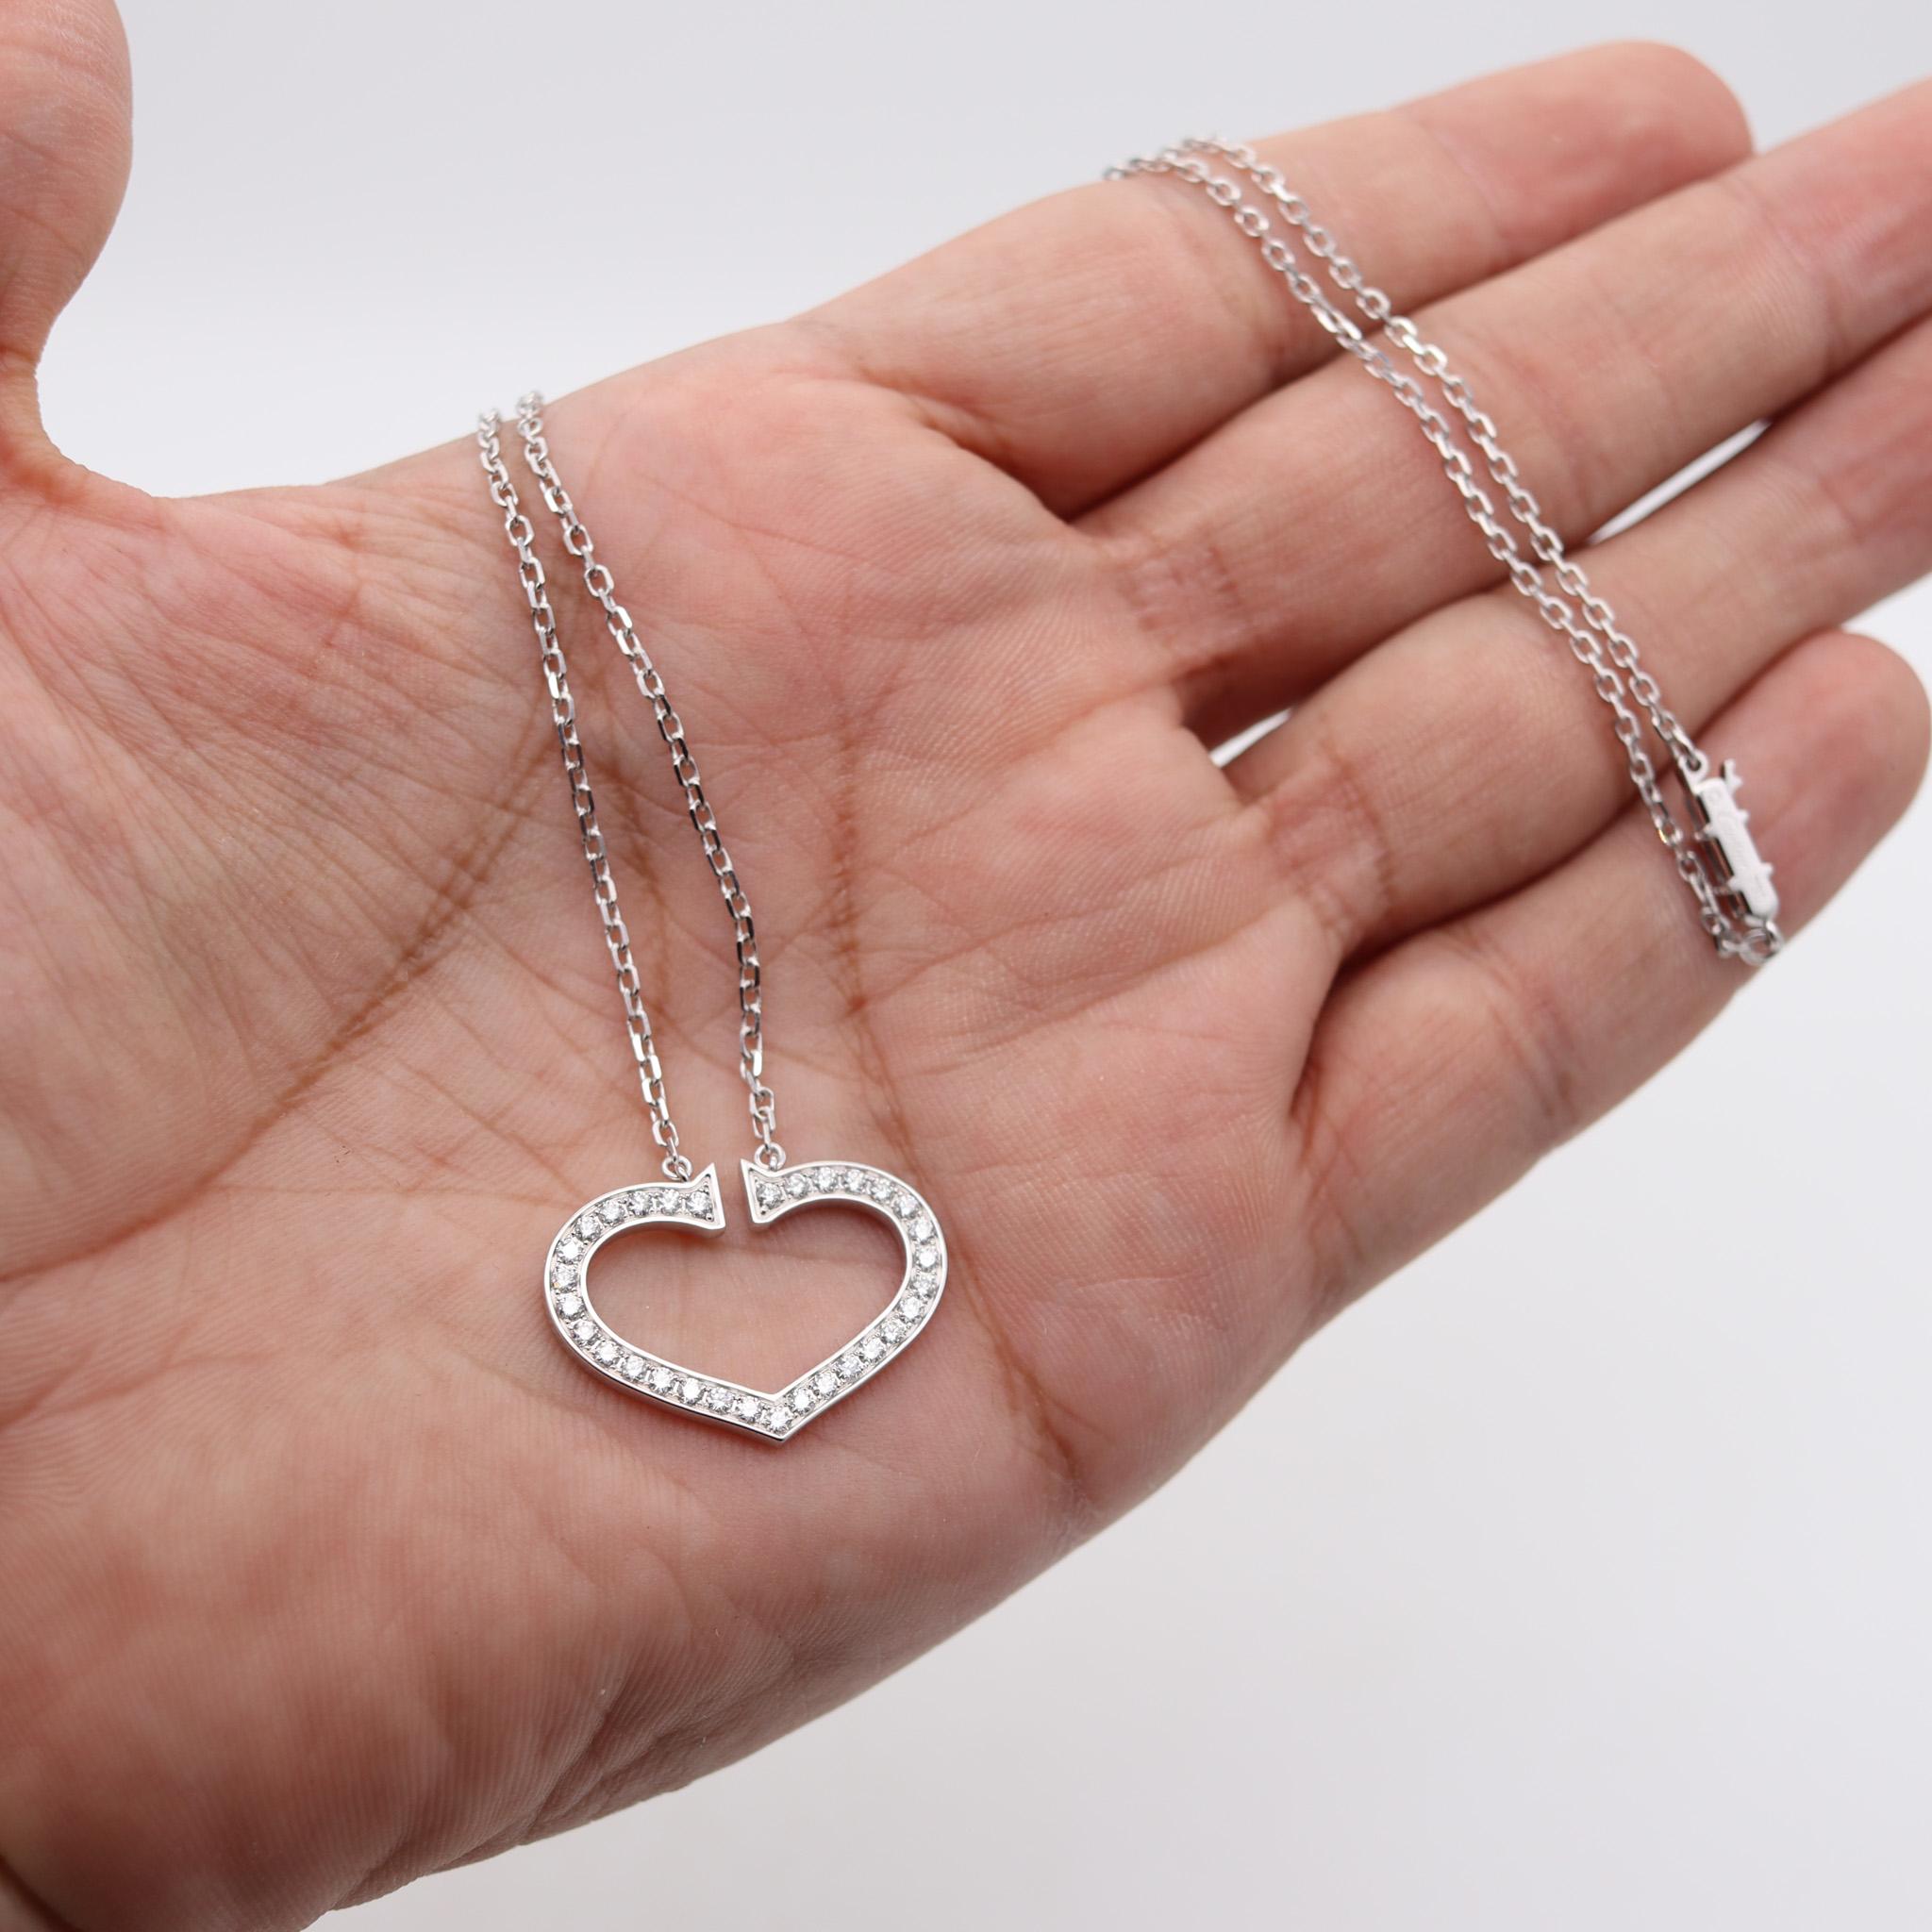 Cartier C Heart Necklace In 18Kt White Gold With 1.55 Ctw In VVS Diamonds 1